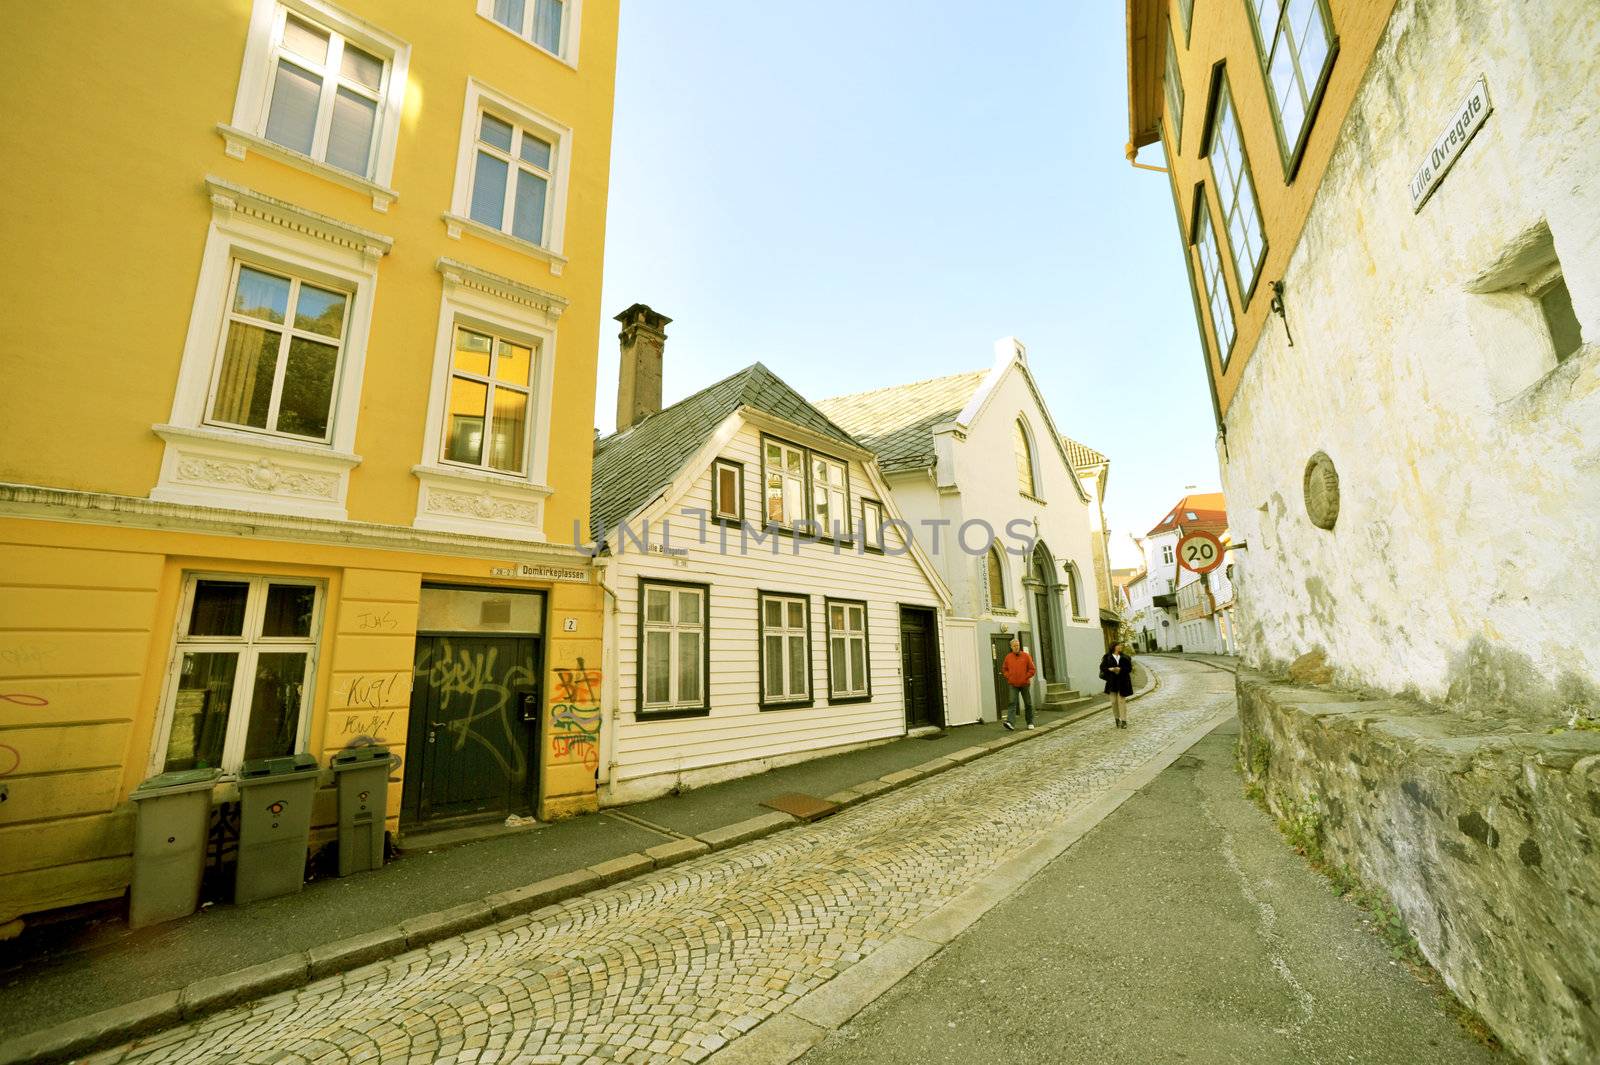 View on the old street in Bergen, Norway